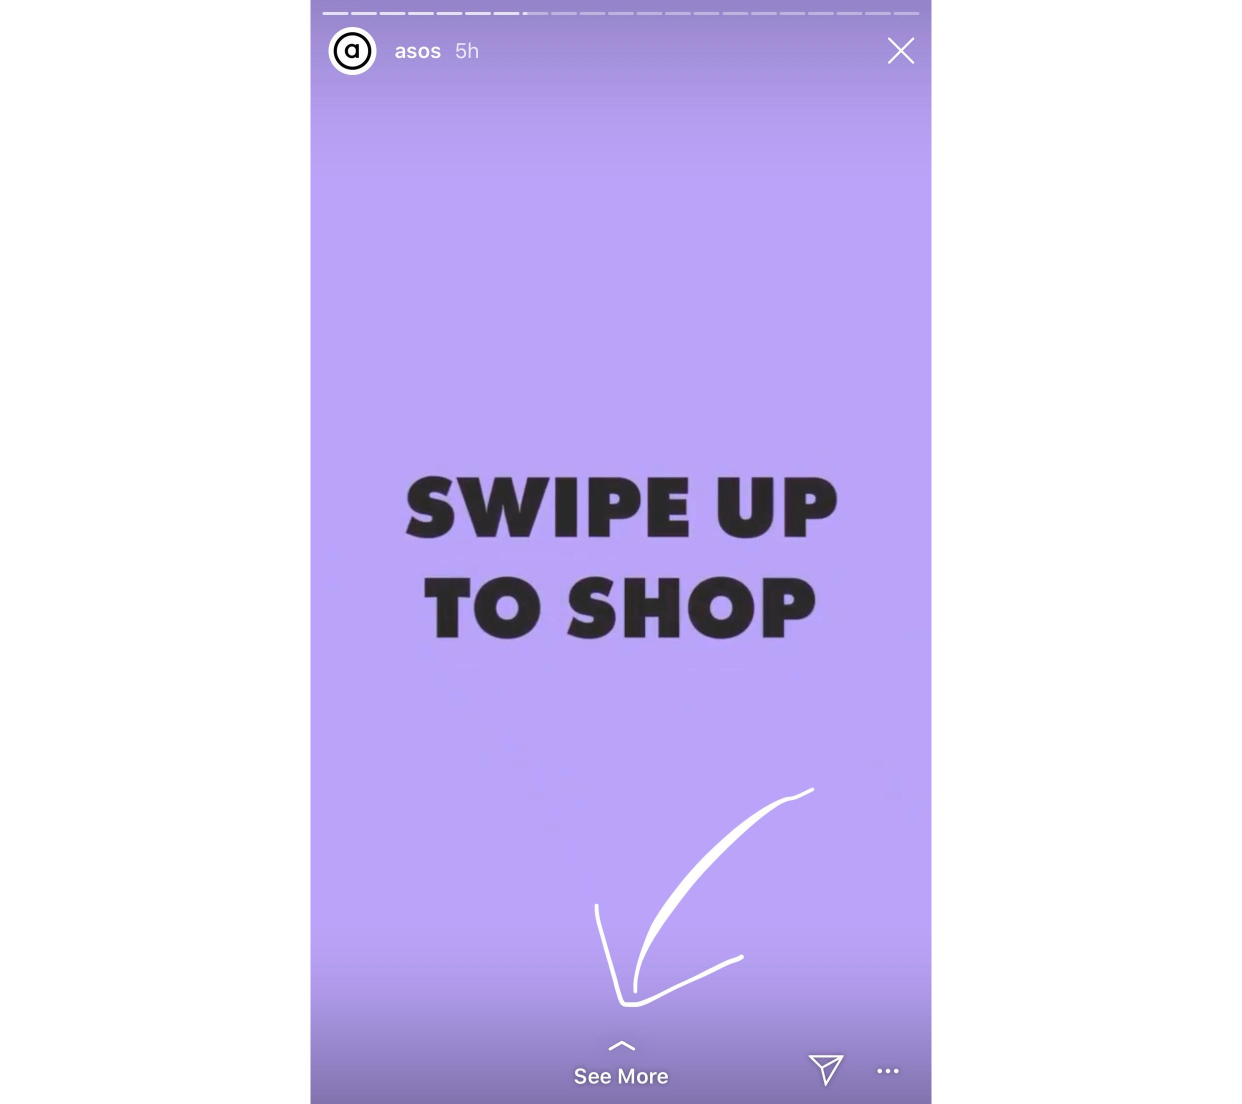 How to Add a Link to an Instagram Story